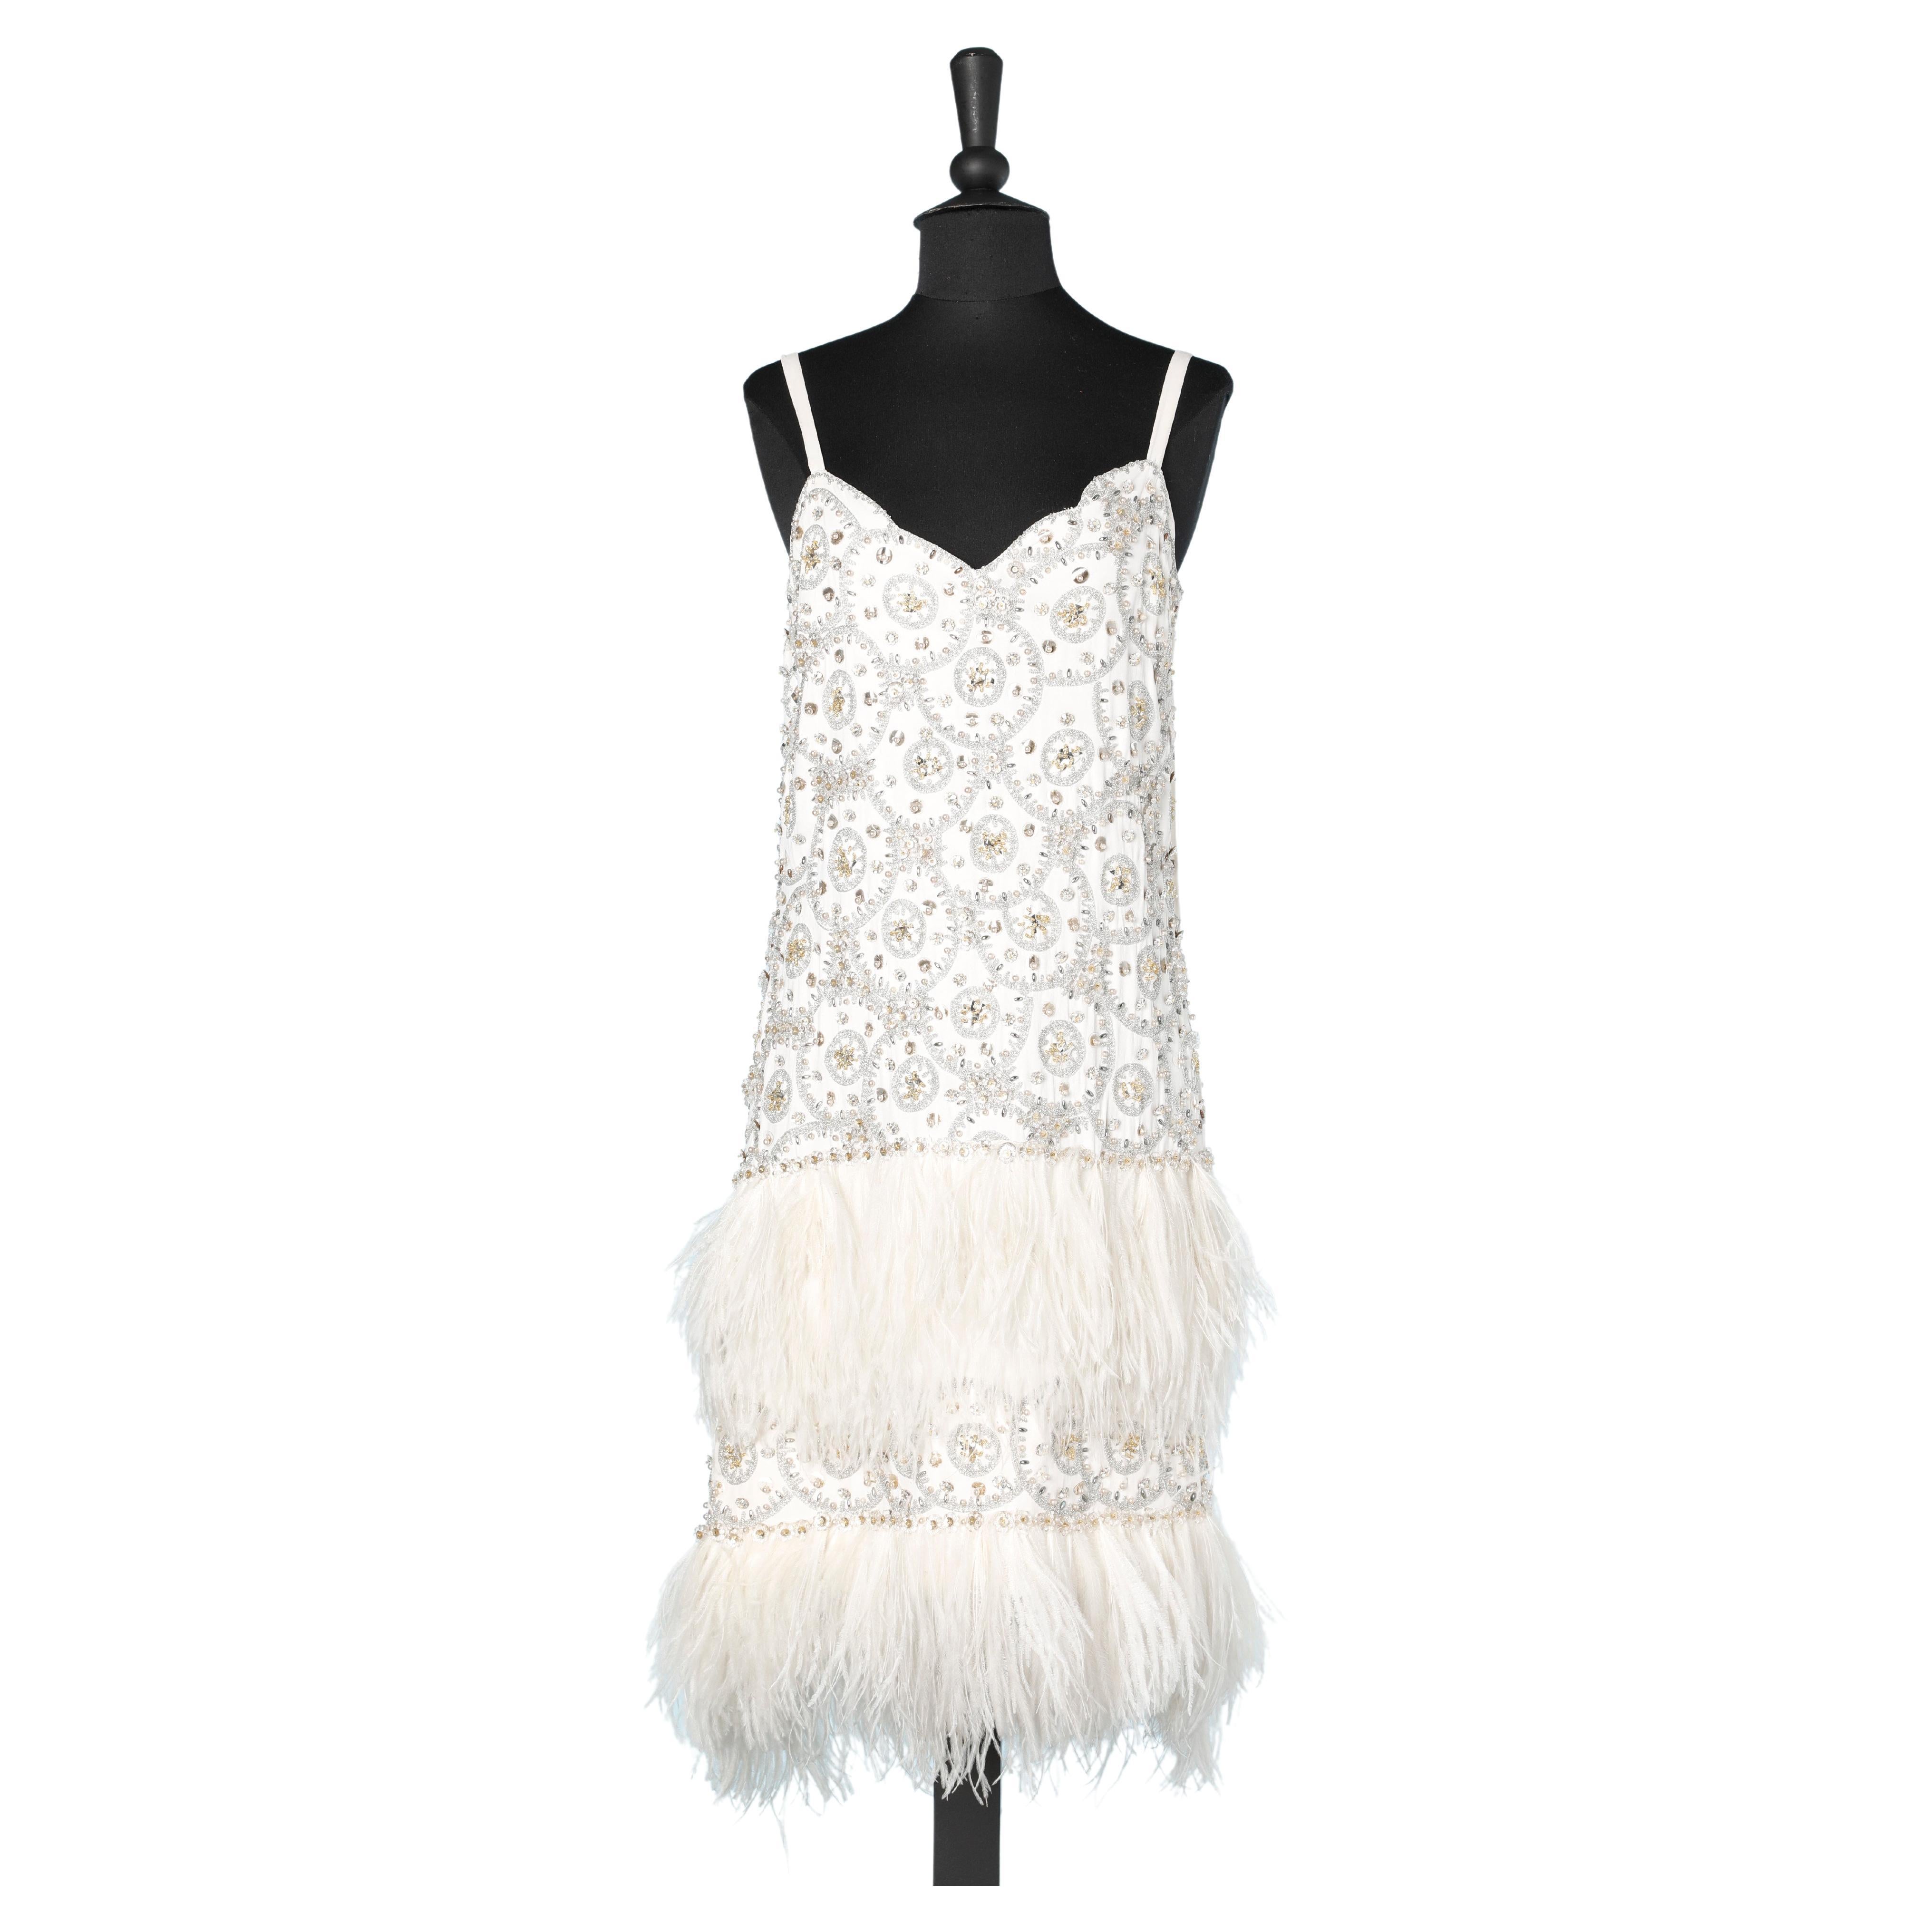 Full embroidered 1960's evening dress with white feathers 